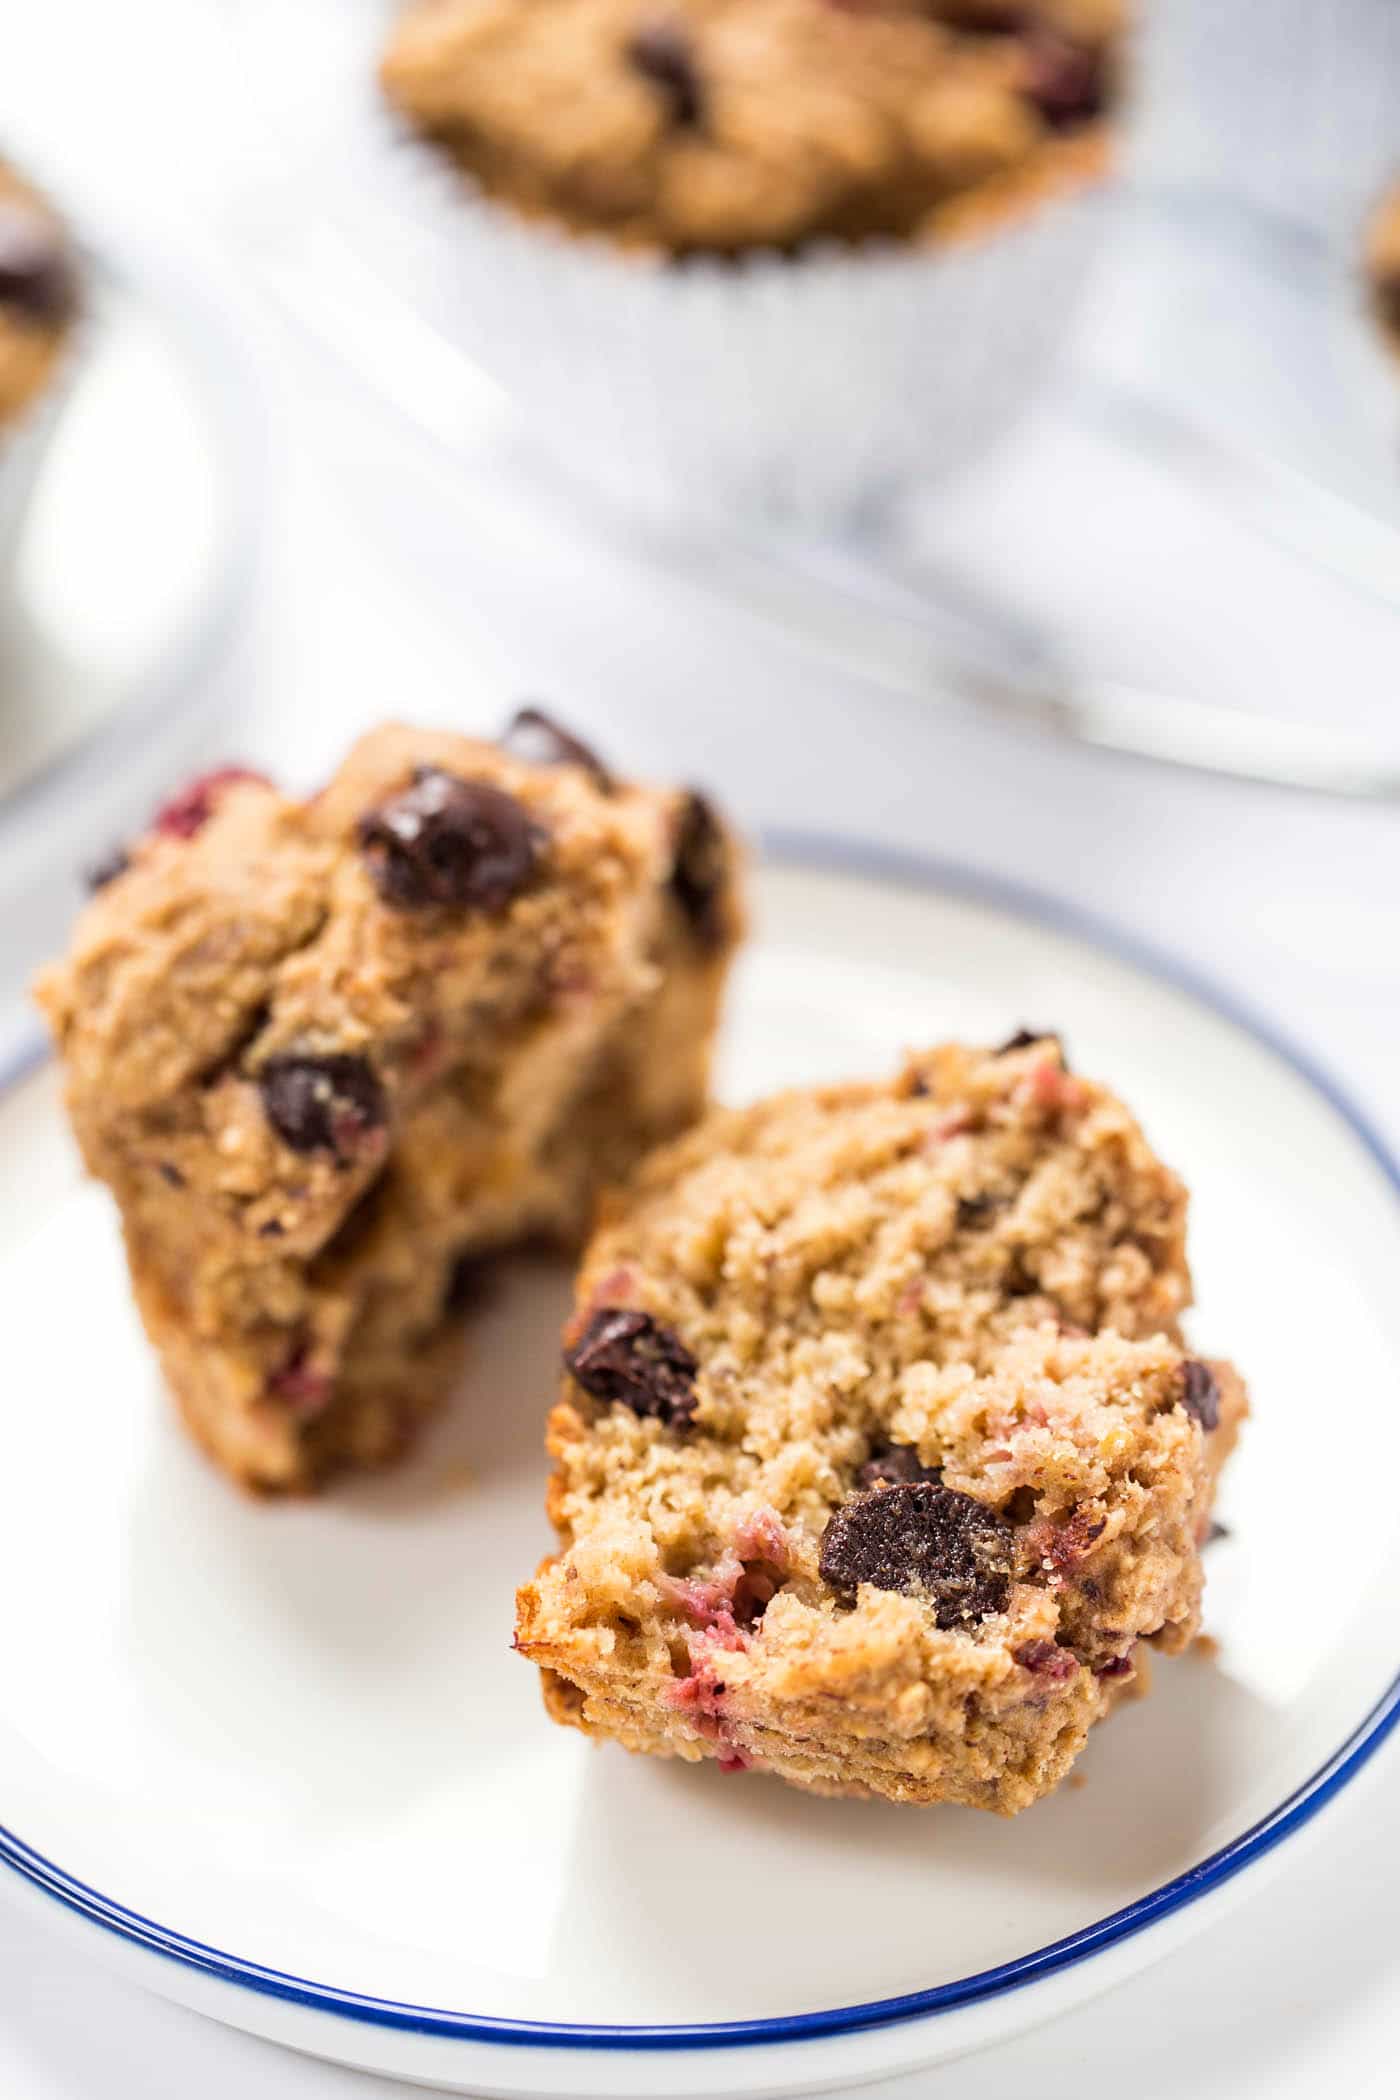 Healthy Raspberry Chocolate Chip Quinoa Muffins - sweetened naturally, made without any oils, AND they're gluten-free + vegan